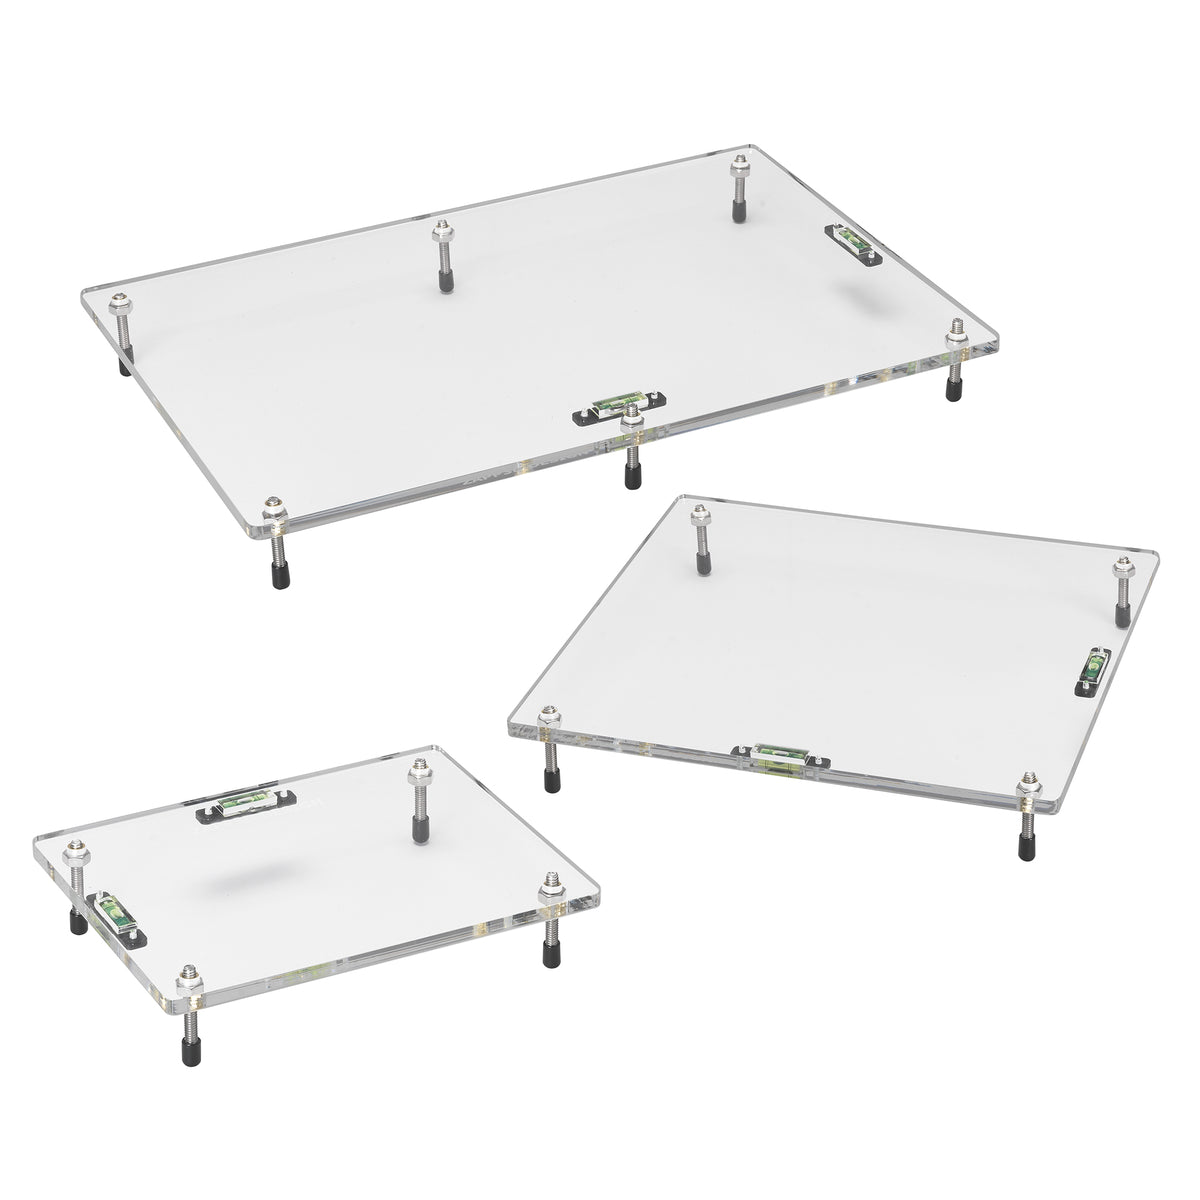 Muulaii Leveling Board for Epoxy Resin & Art & Working Surface, 12 x 16  Resin Leveling Table Adjustable Self Leveling Epoxy Resin Table for Resin